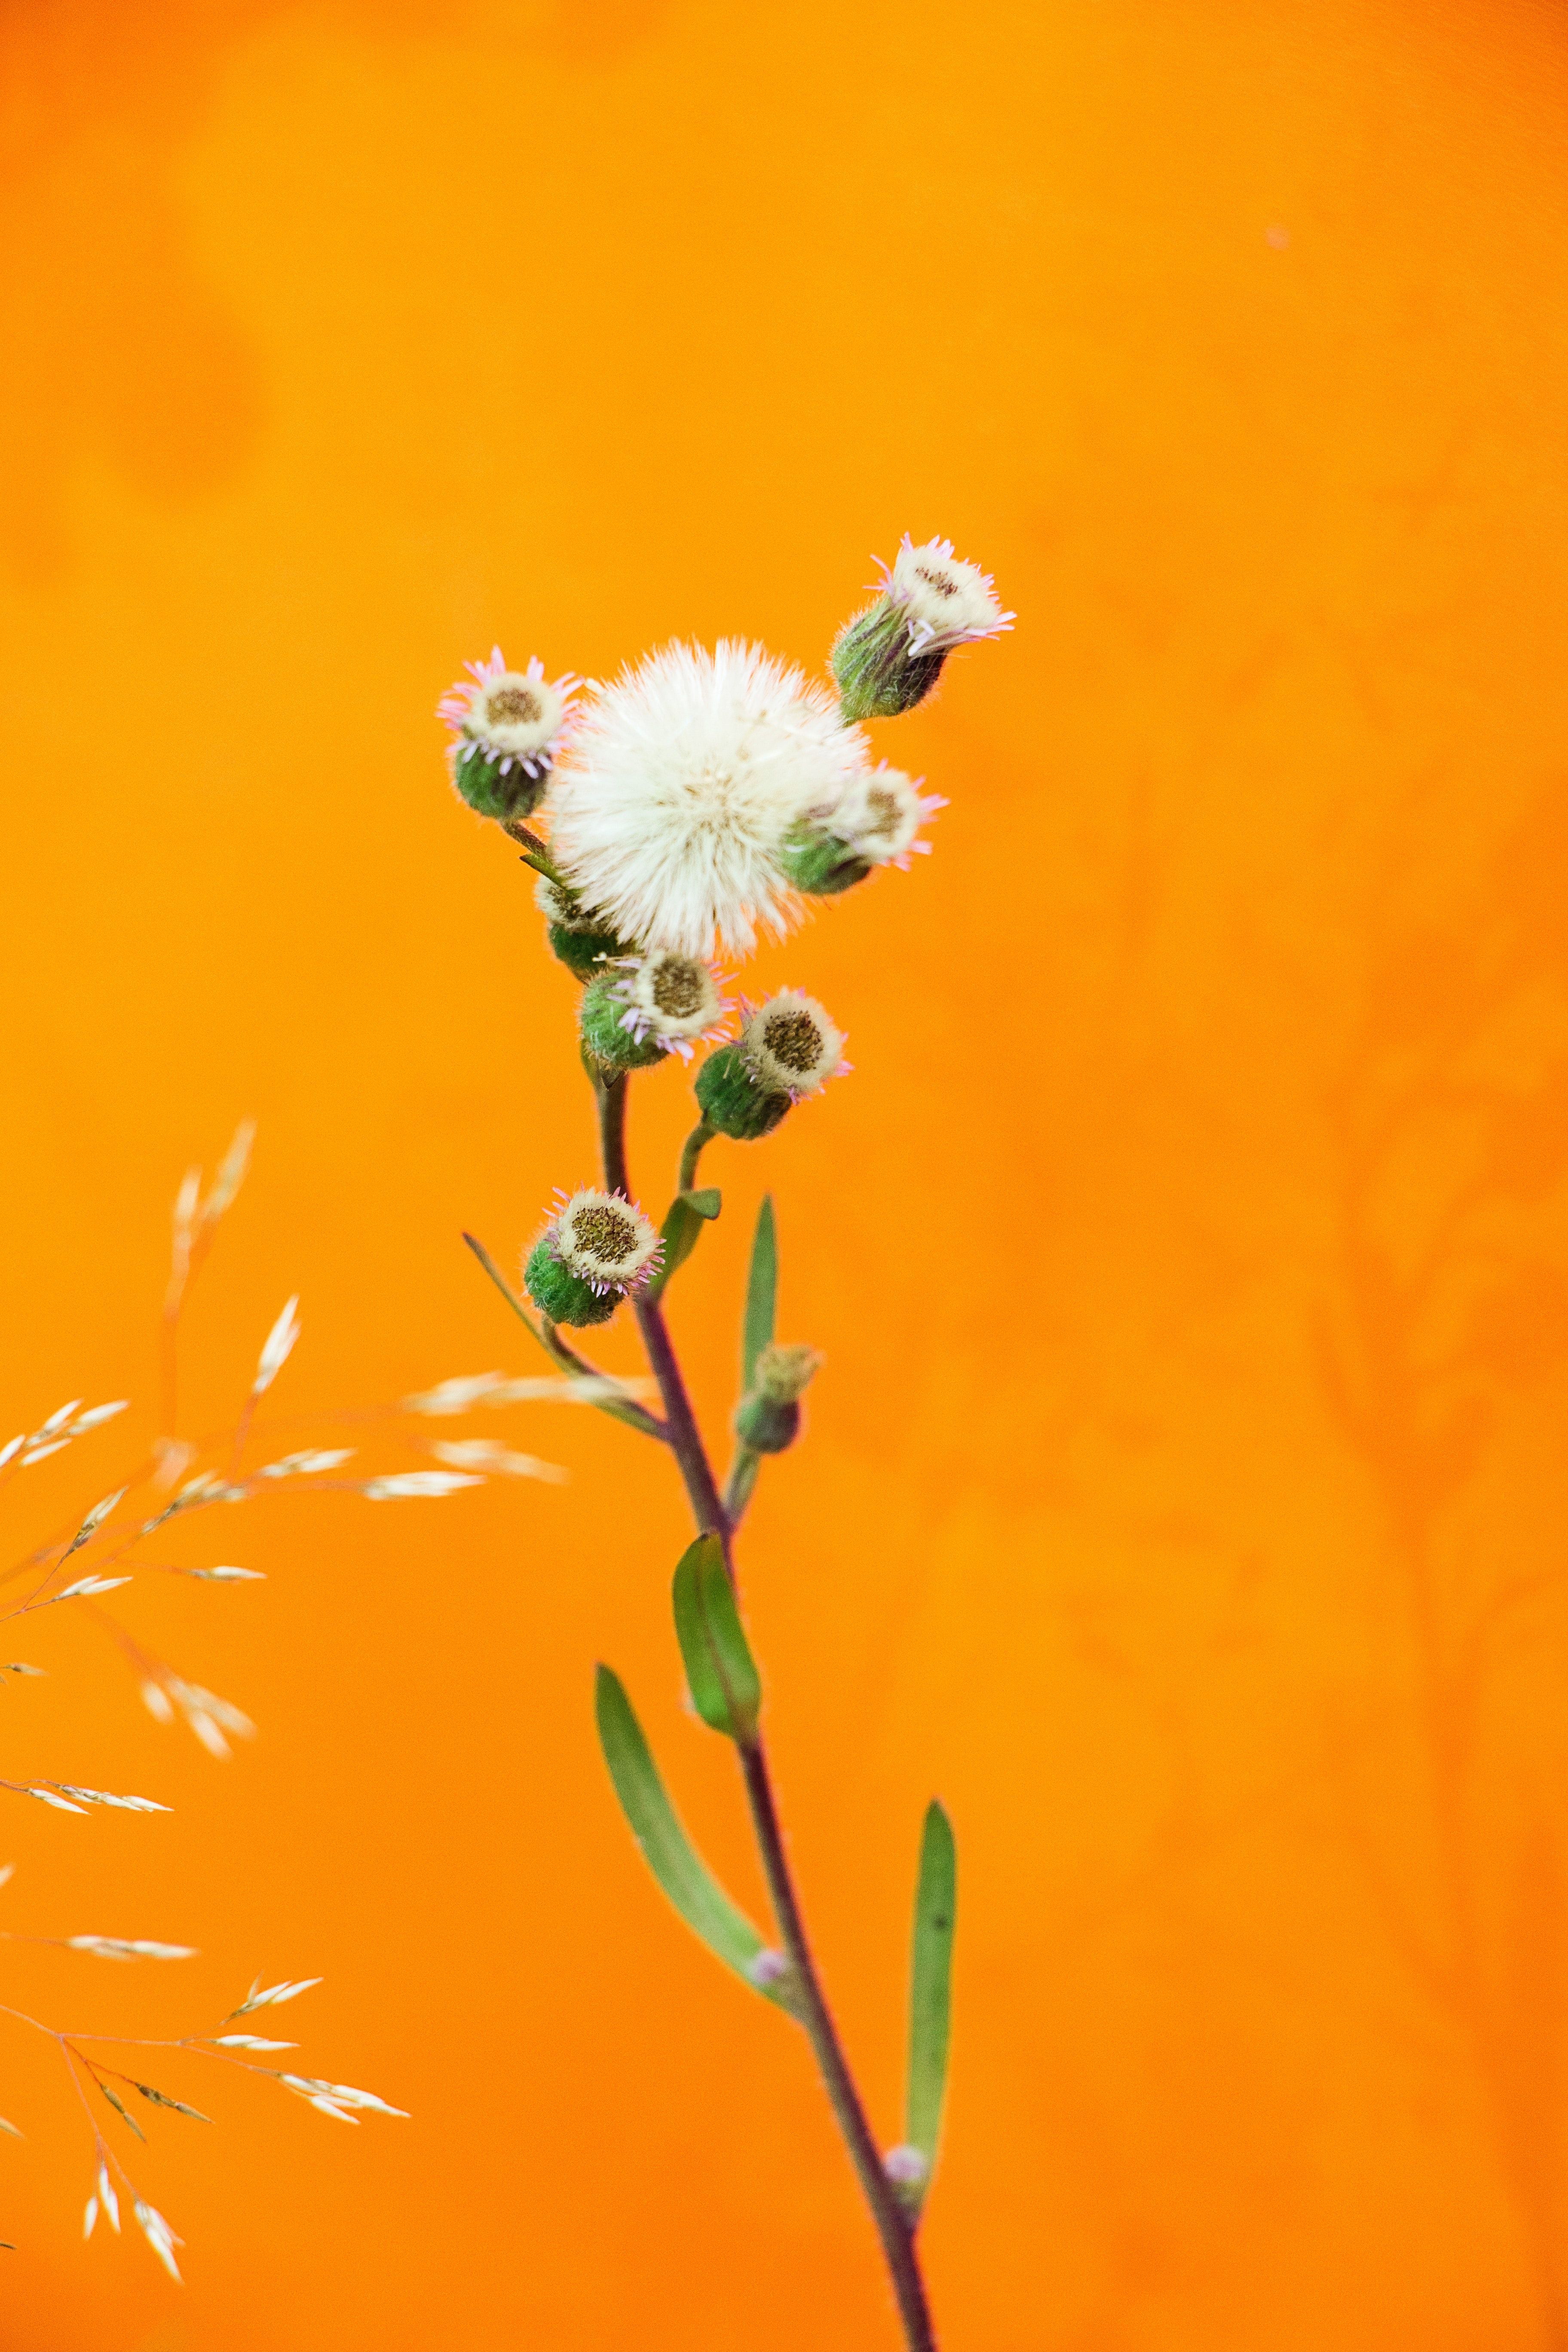 A single white flower with green leaves on a stem against an orange background. - Dandelions